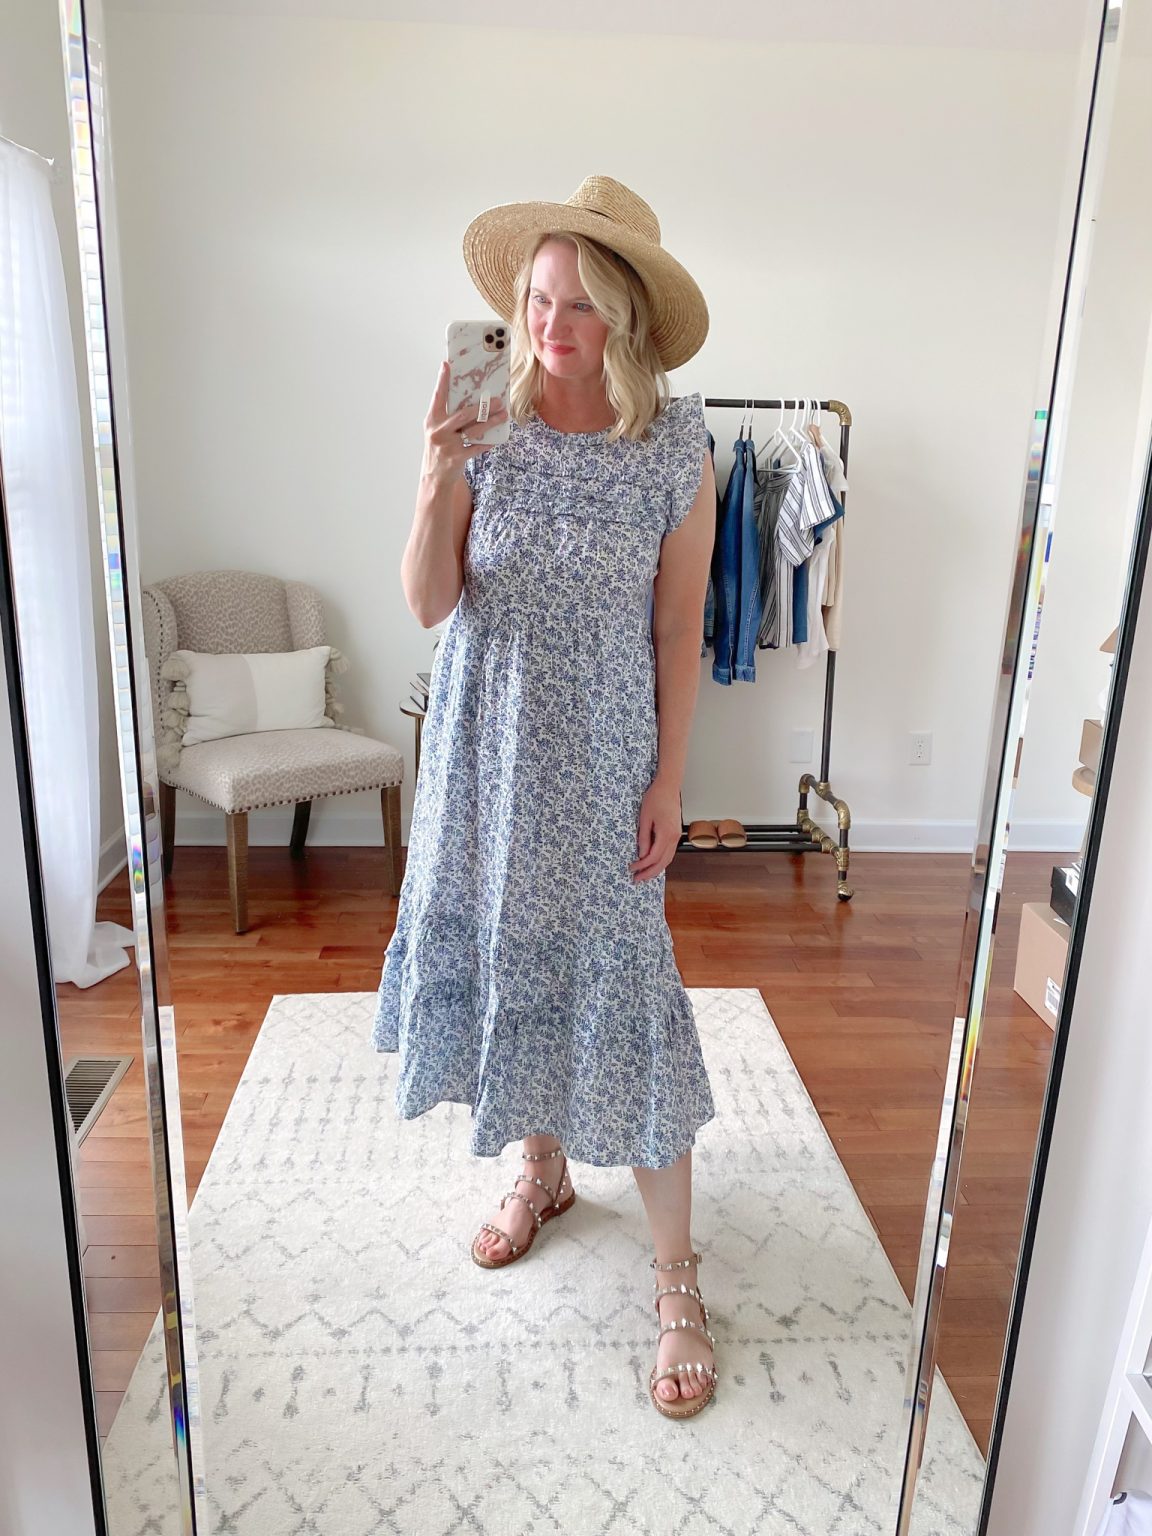 Try-On Session: ABLE, Loft, Old Navy, Target - Classy Yet Trendy